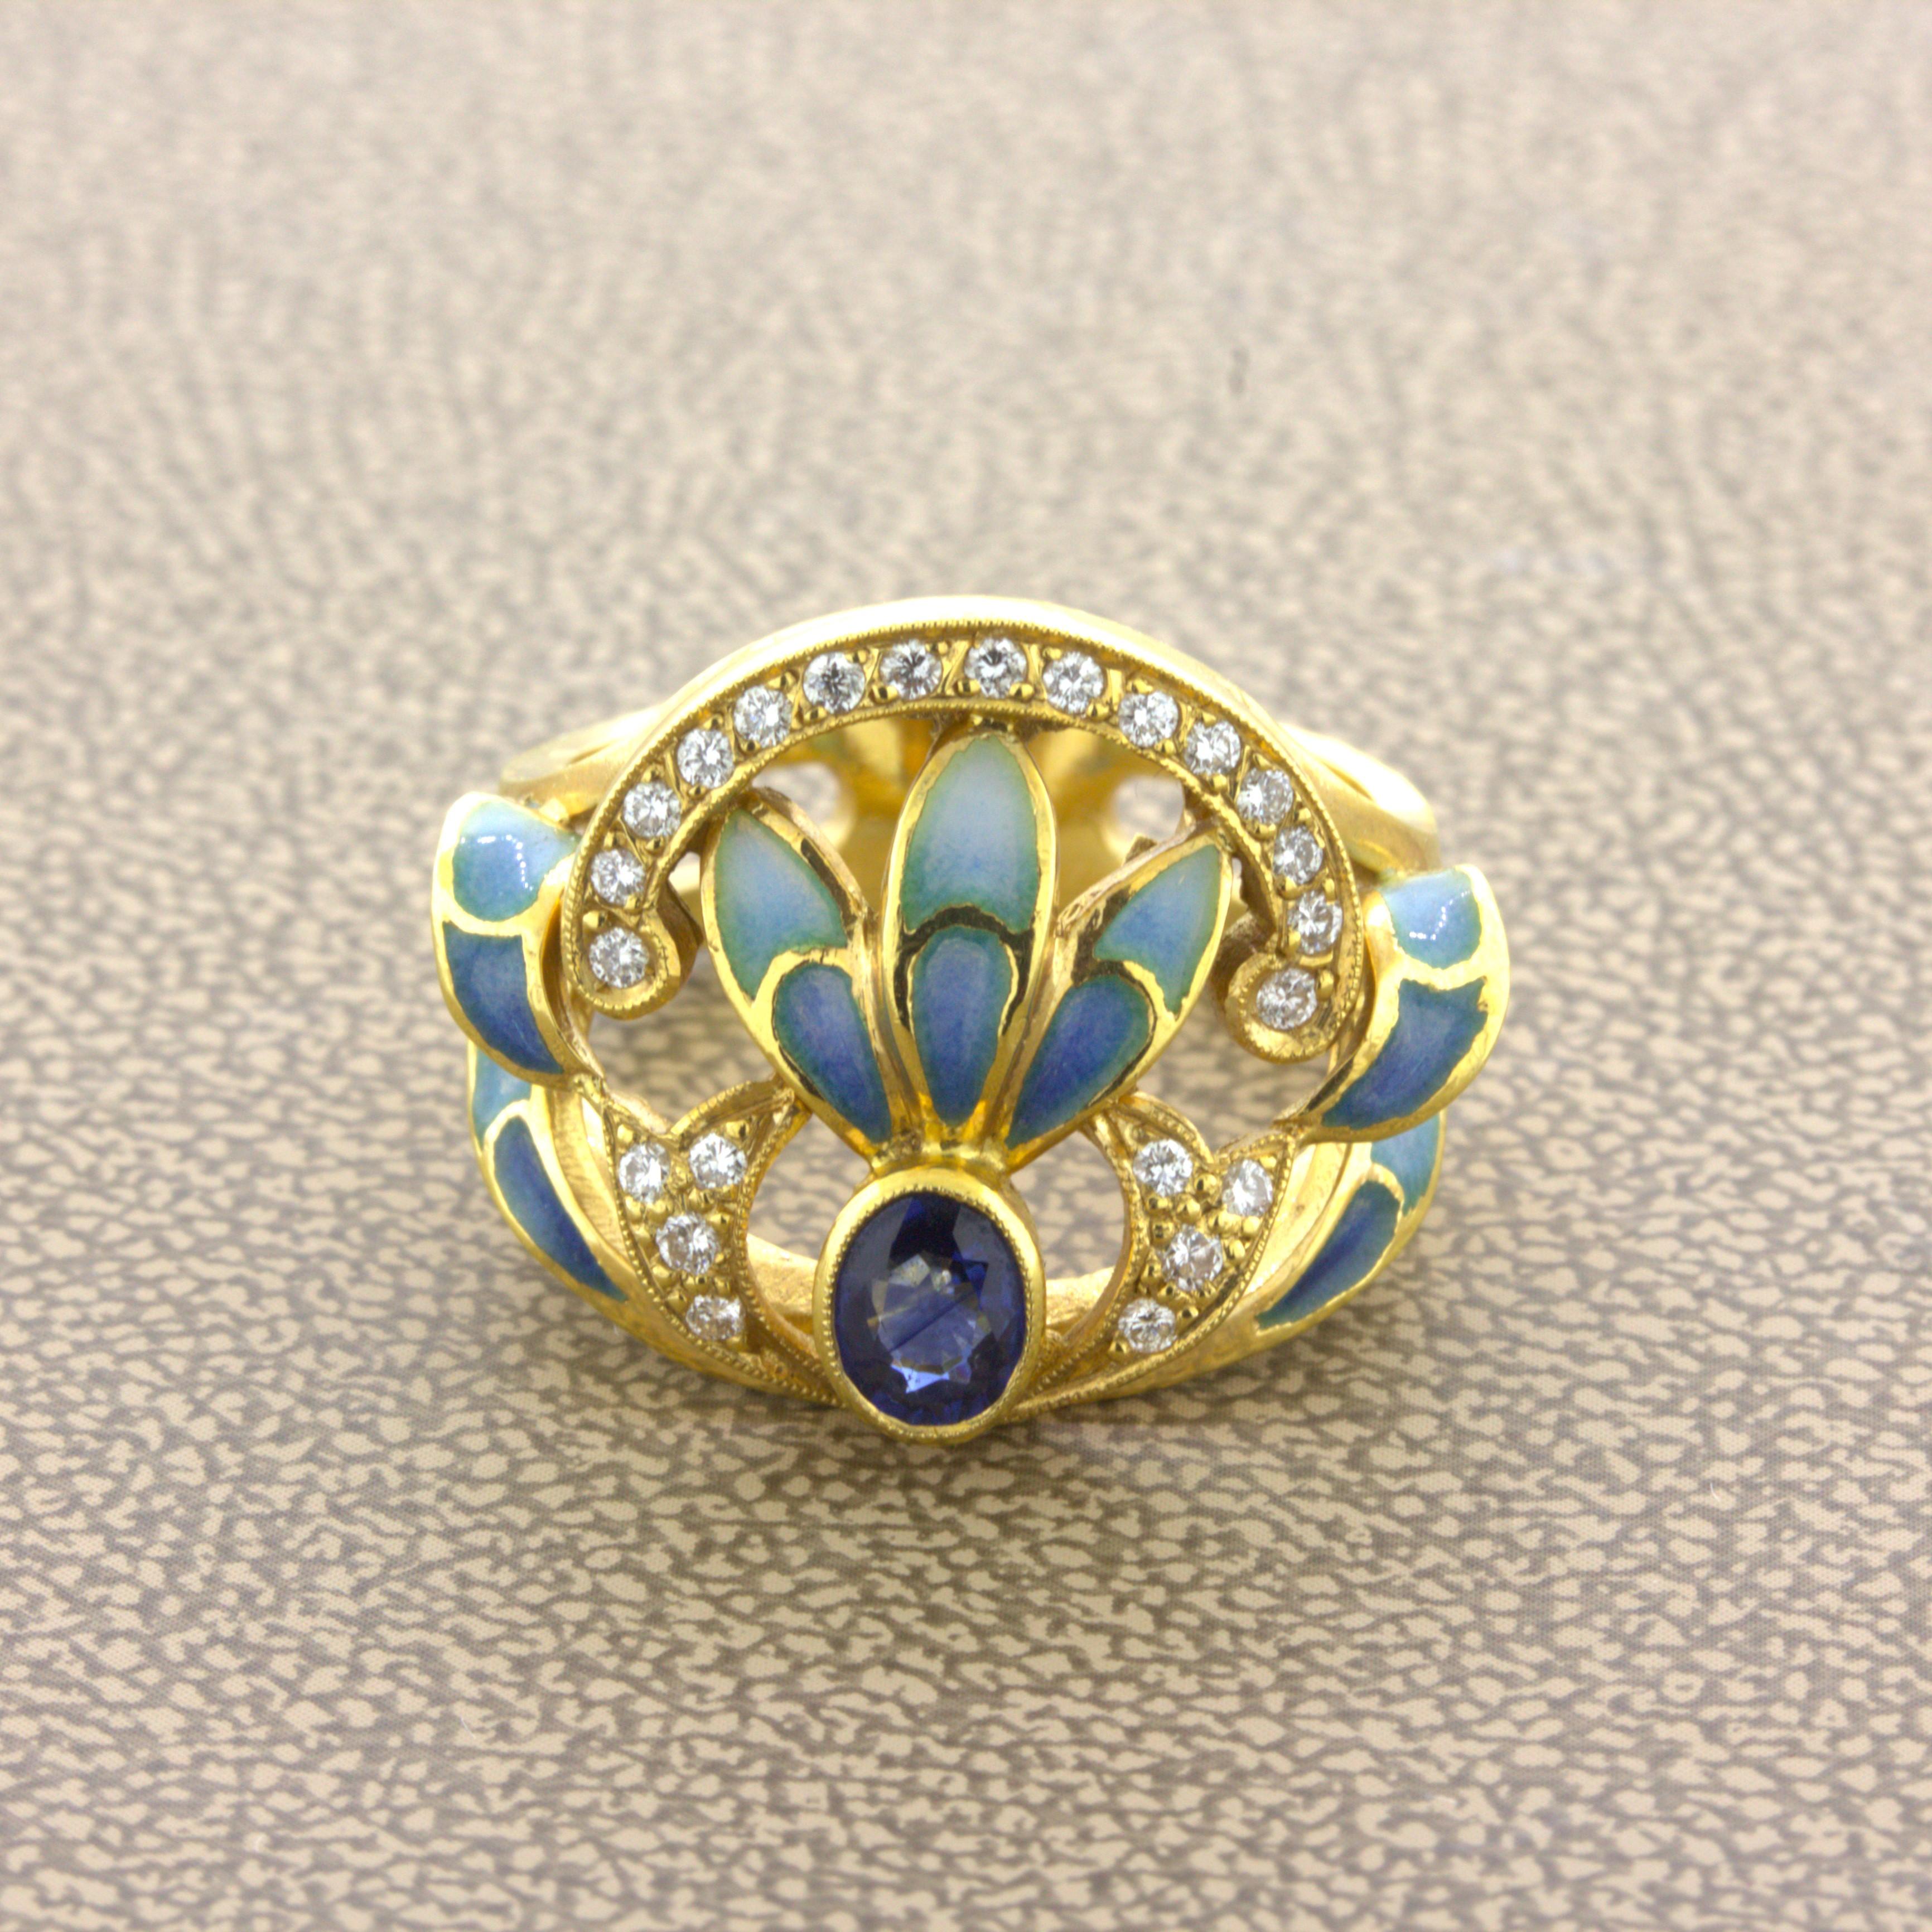 A sweet and stylish piece by Barcelona based designer Masriera. Known for their Art Nouveau style, this piece is no exception with the lovely bright yellow gold mixed with the blue sapphire and hand-painted enamel. The enamel is applied without a